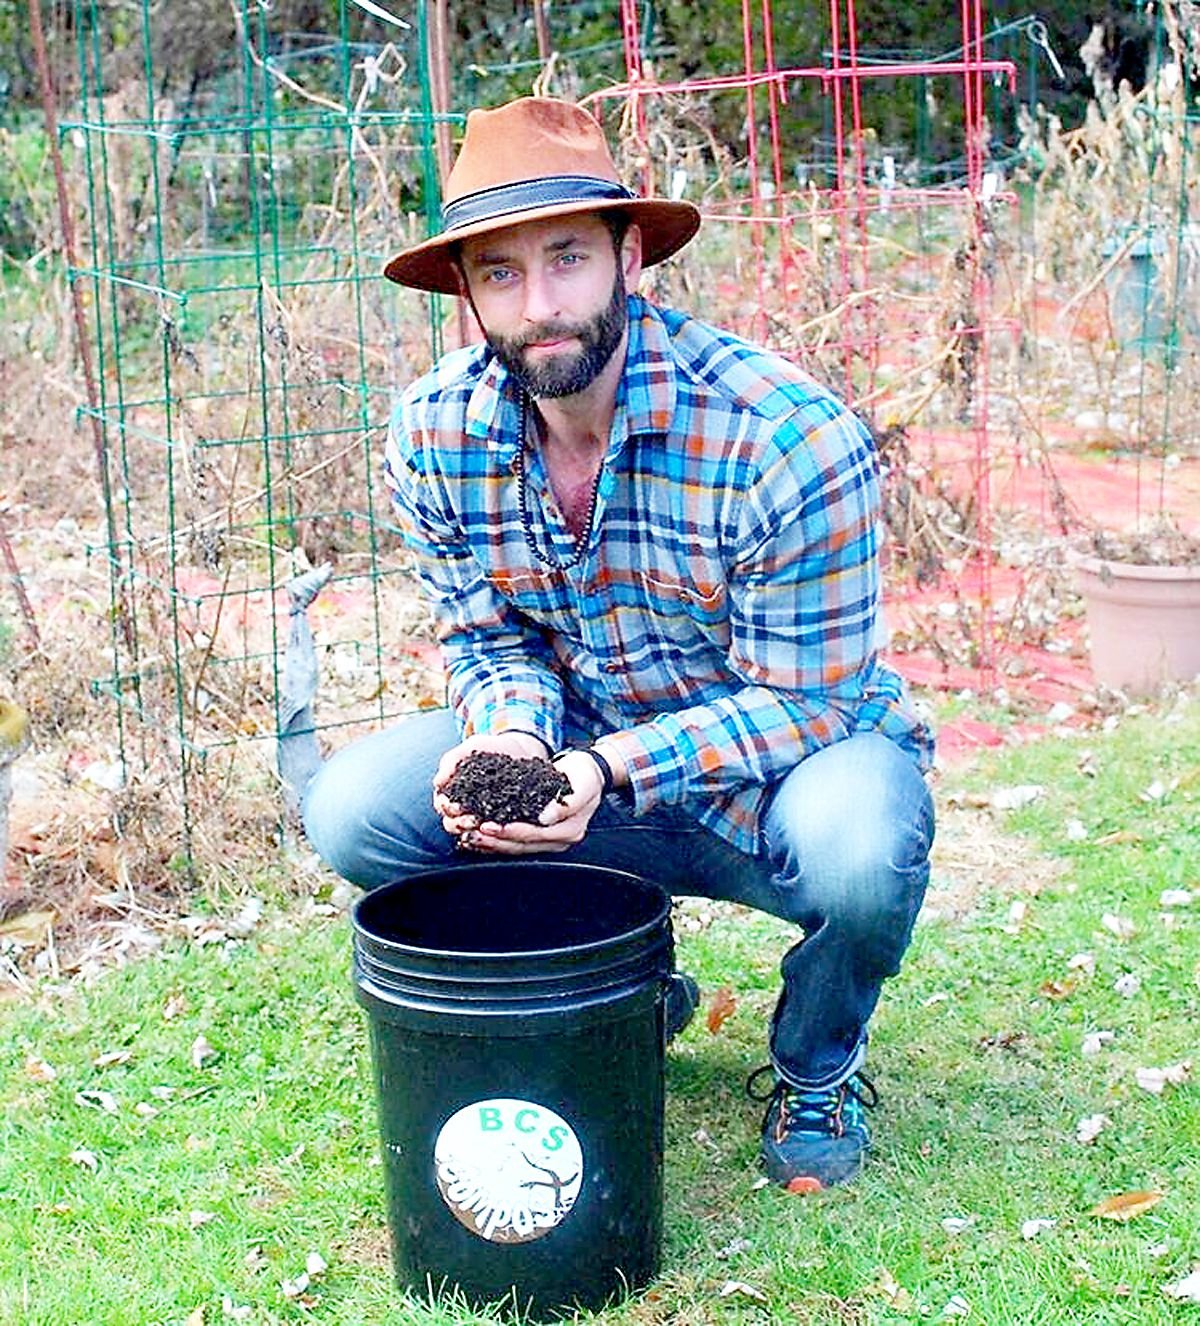 BCS Compost Founder Brian Schneider shows how waste can be recycled into nutrient soil for gardens.